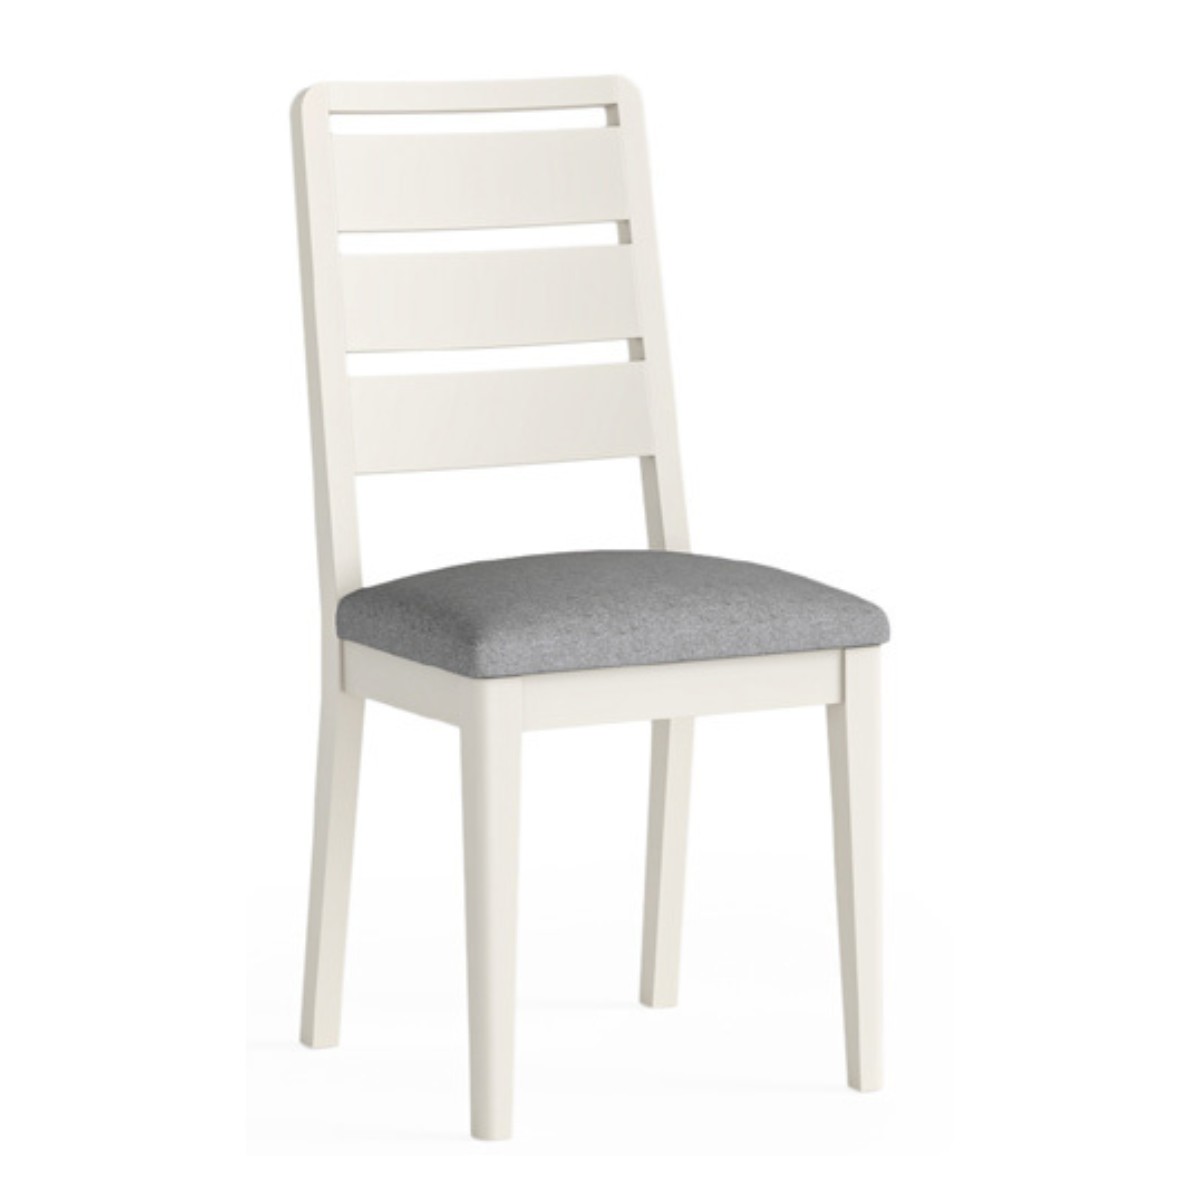 Marcella White Ladder Back Dining Chair - 1